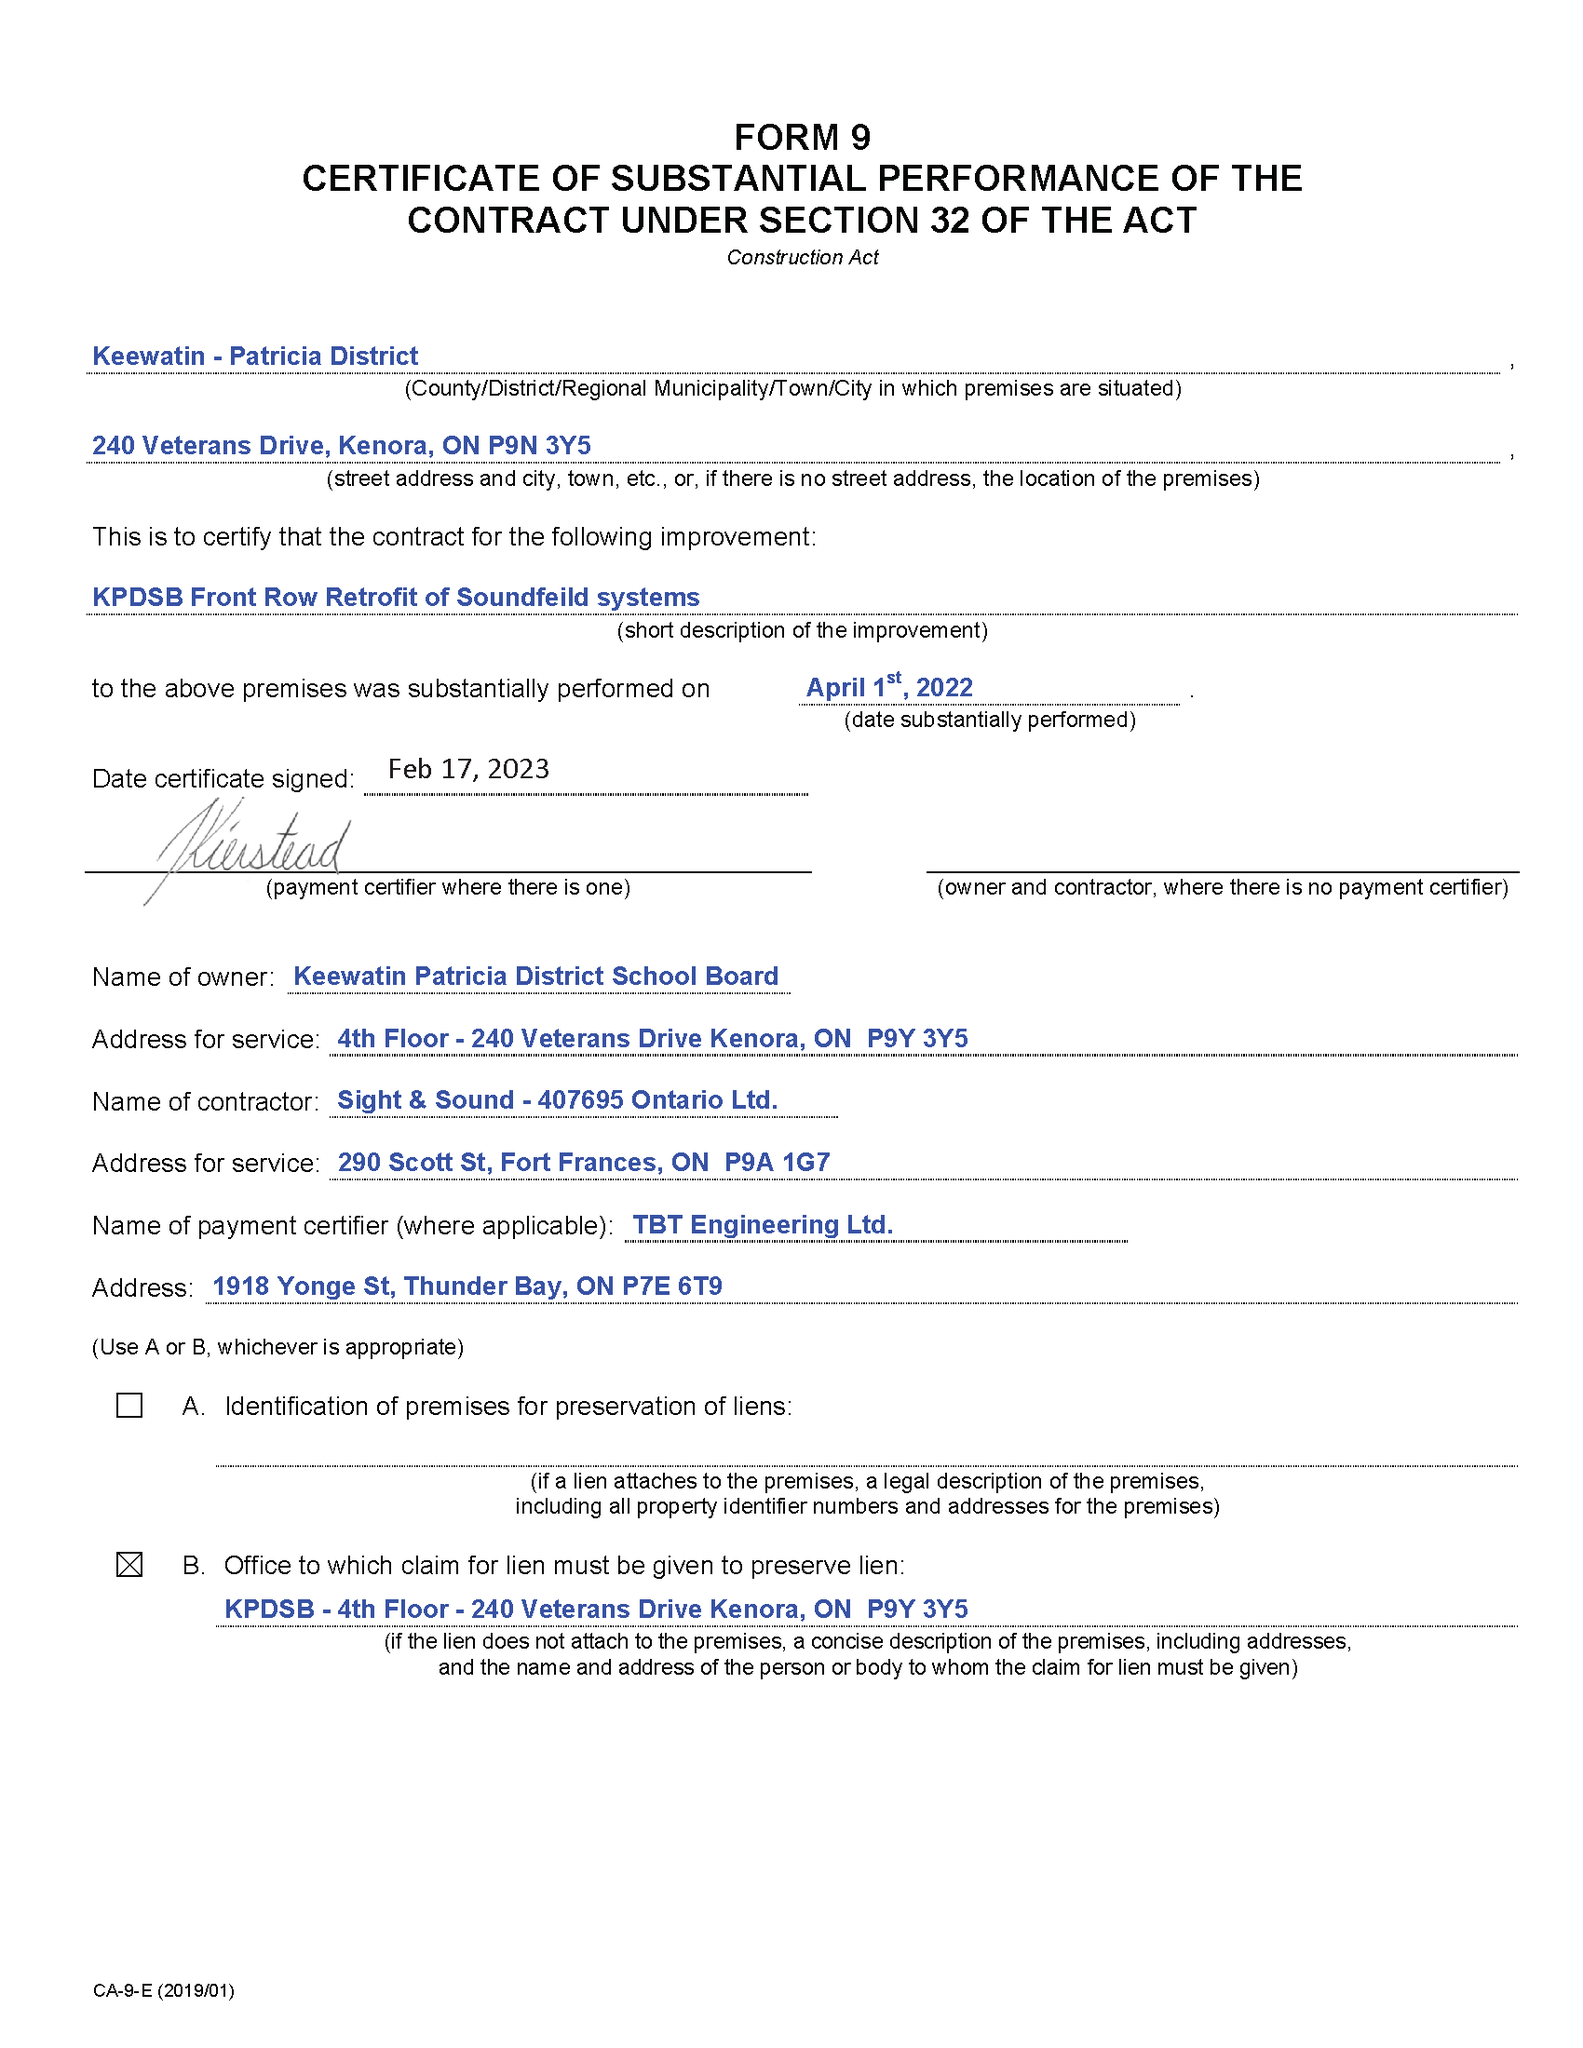 CCDC Form 9